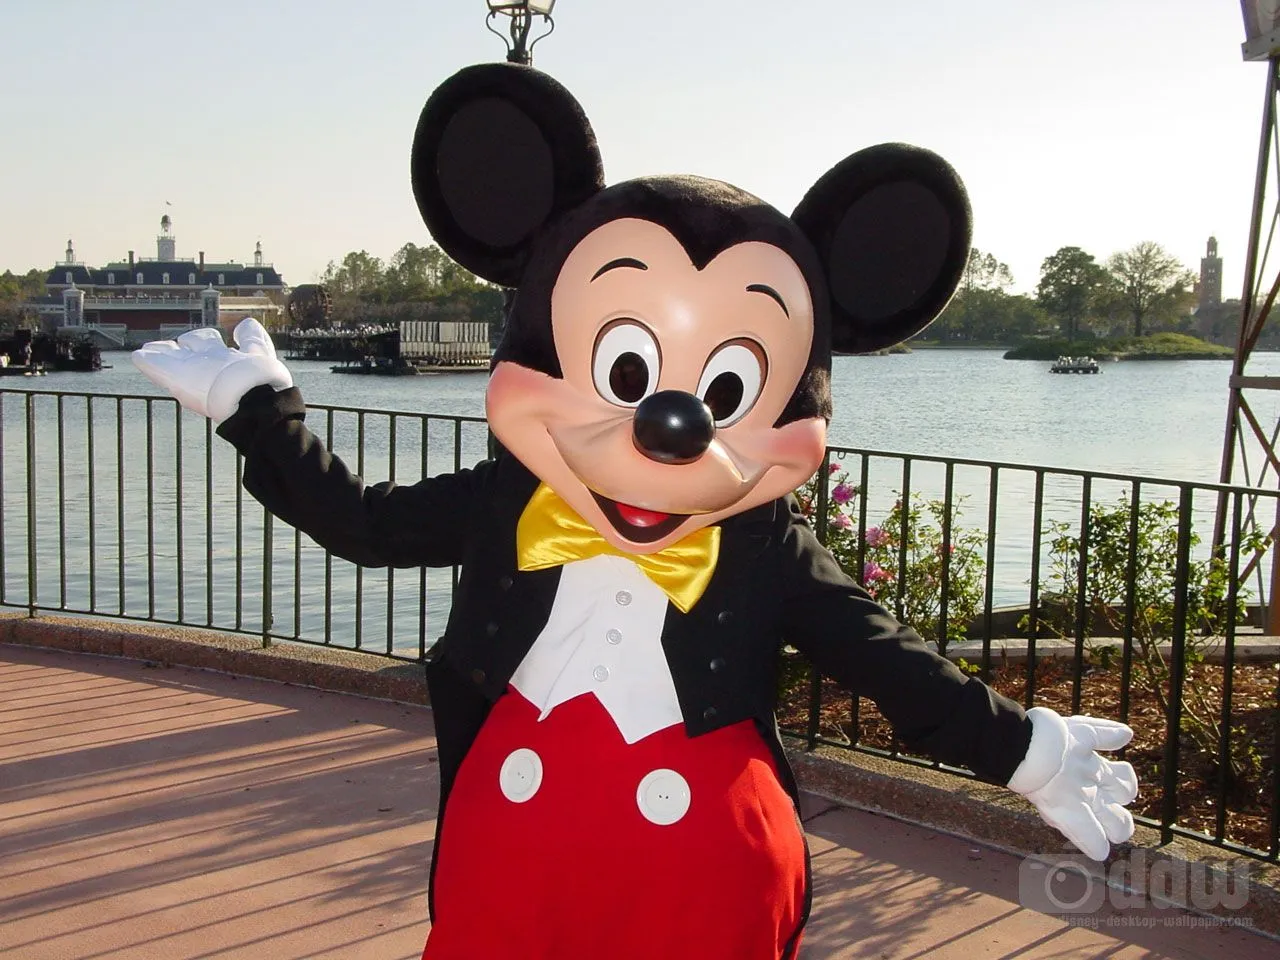 The famous Disney icon: Mickey Mouse (Photo credit: Google images)